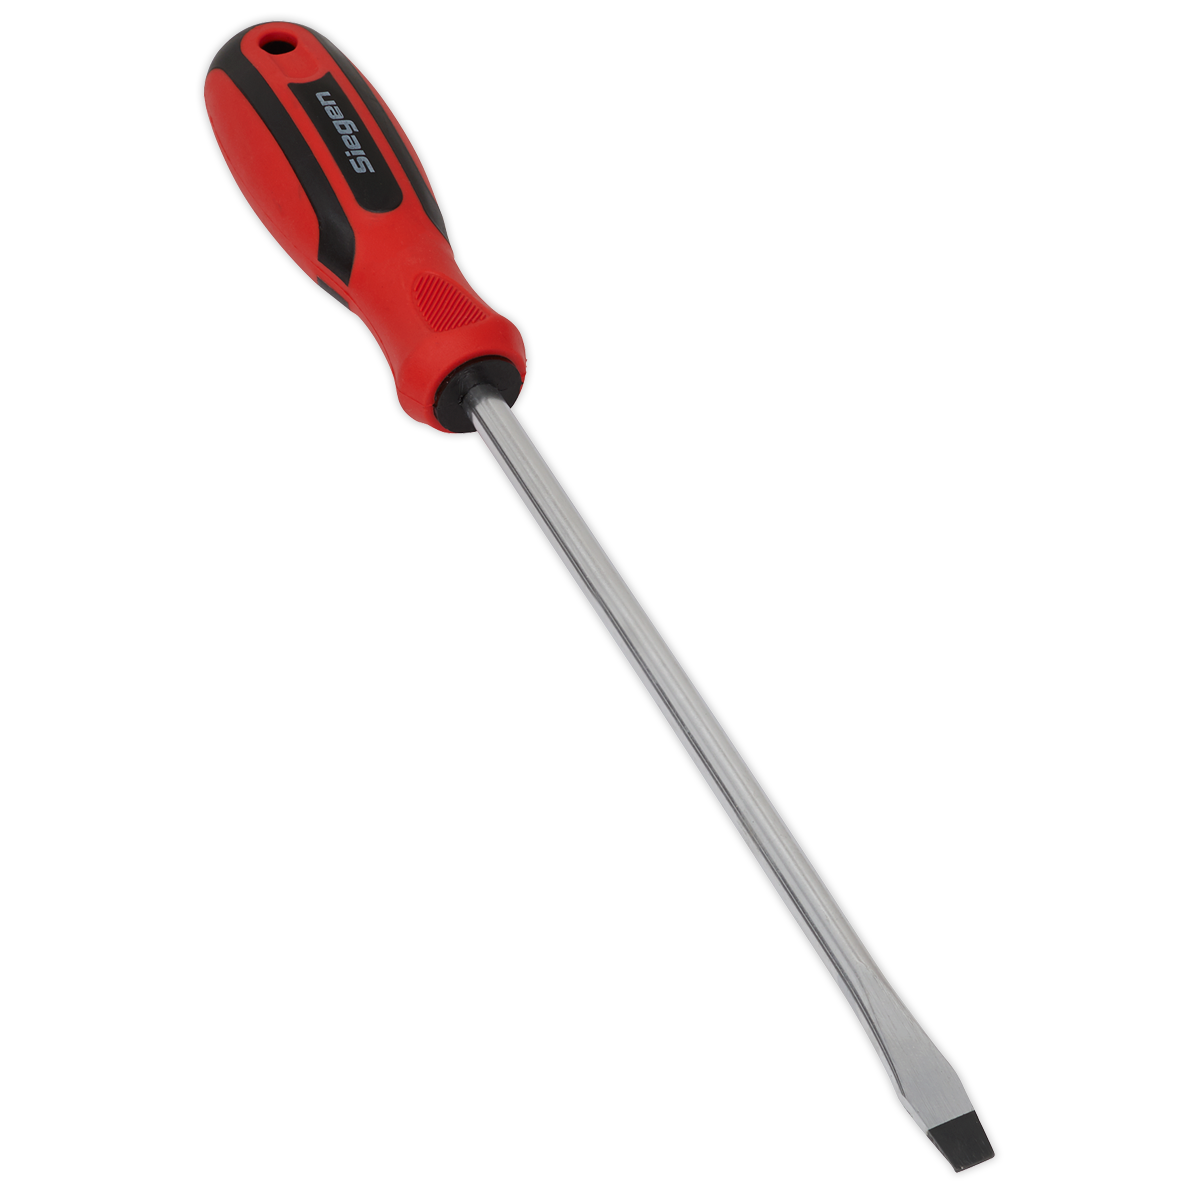 Screwdriver Slotted 8 x 200mm - S01177 - Farming Parts